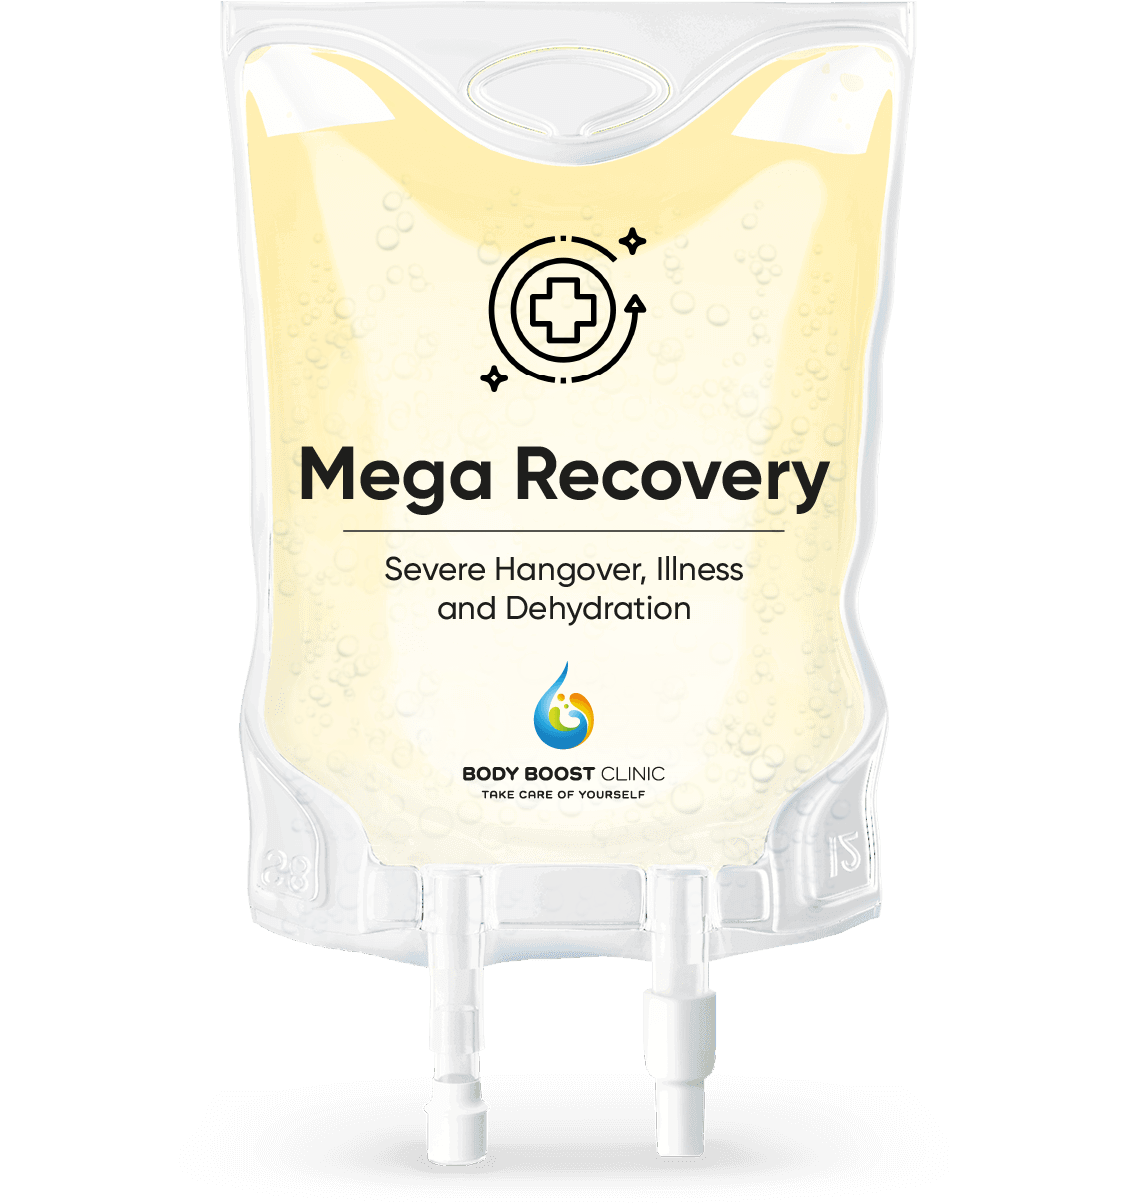 Bag full of liquid used as IV drip. Combat hangover symptoms with a MEGA RECOVERY IV drip - nausea, fatigue, and dehydration relief in Body Boost Clinic Hull.